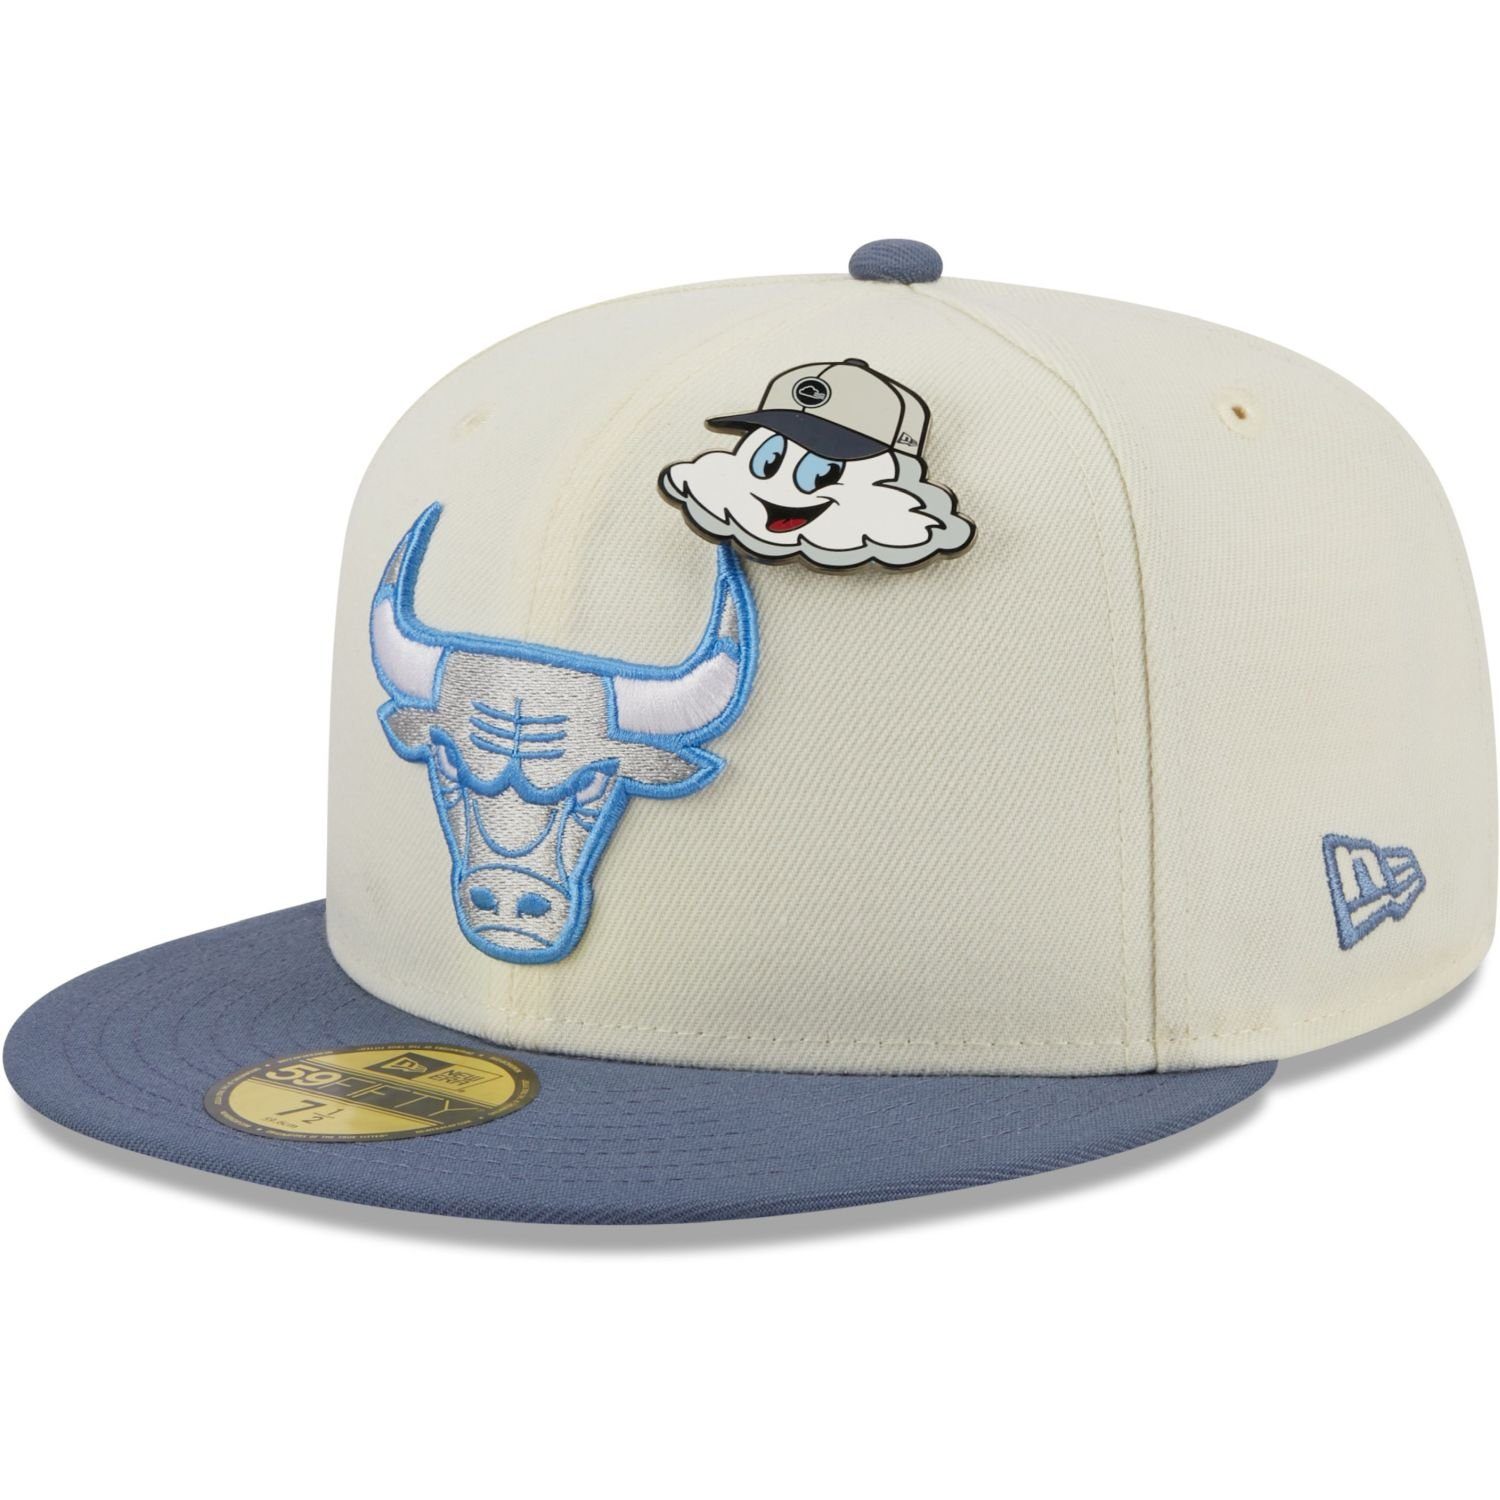 New Era Fitted Cap 59Fifty ELEMENTS PIN Chicago Bulls | Fitted Caps